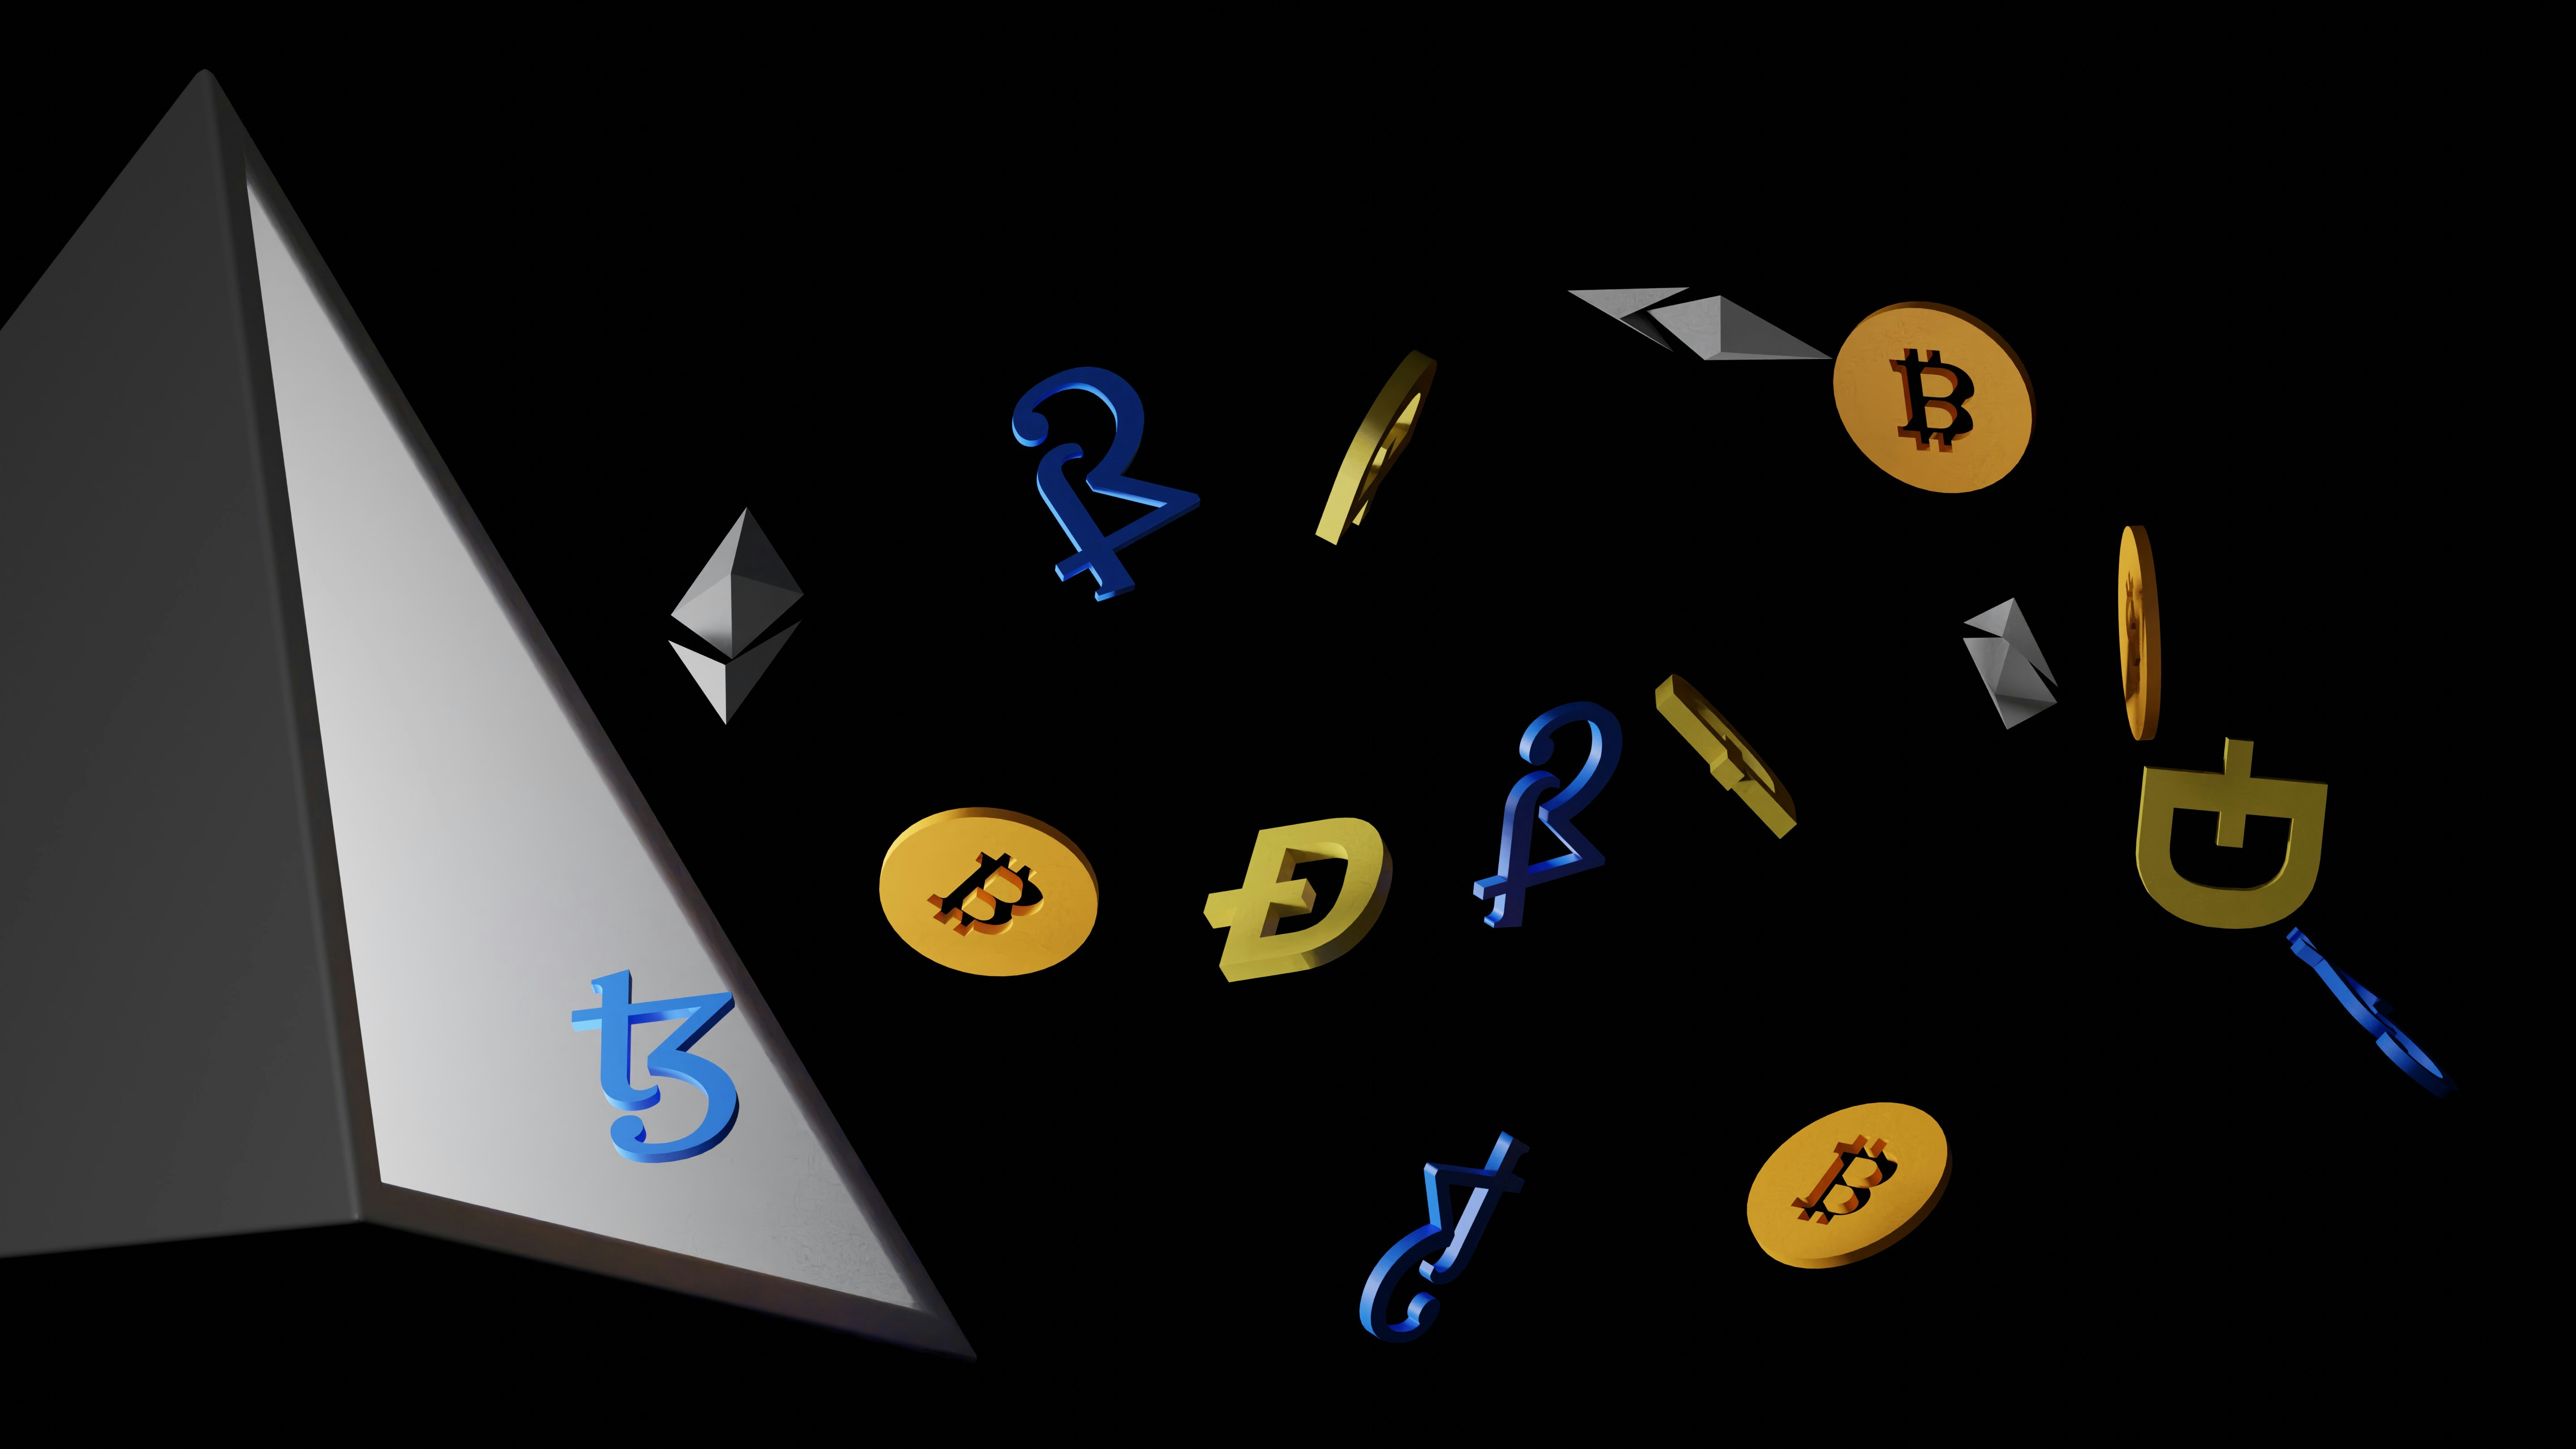 3D illustration of Tezos coin, bitcoin, Ehtereum, and dogecoin emerging from light source. Tezos is a blockchain designed to evolve. work : Email: shubhamdhage000@gmail.com